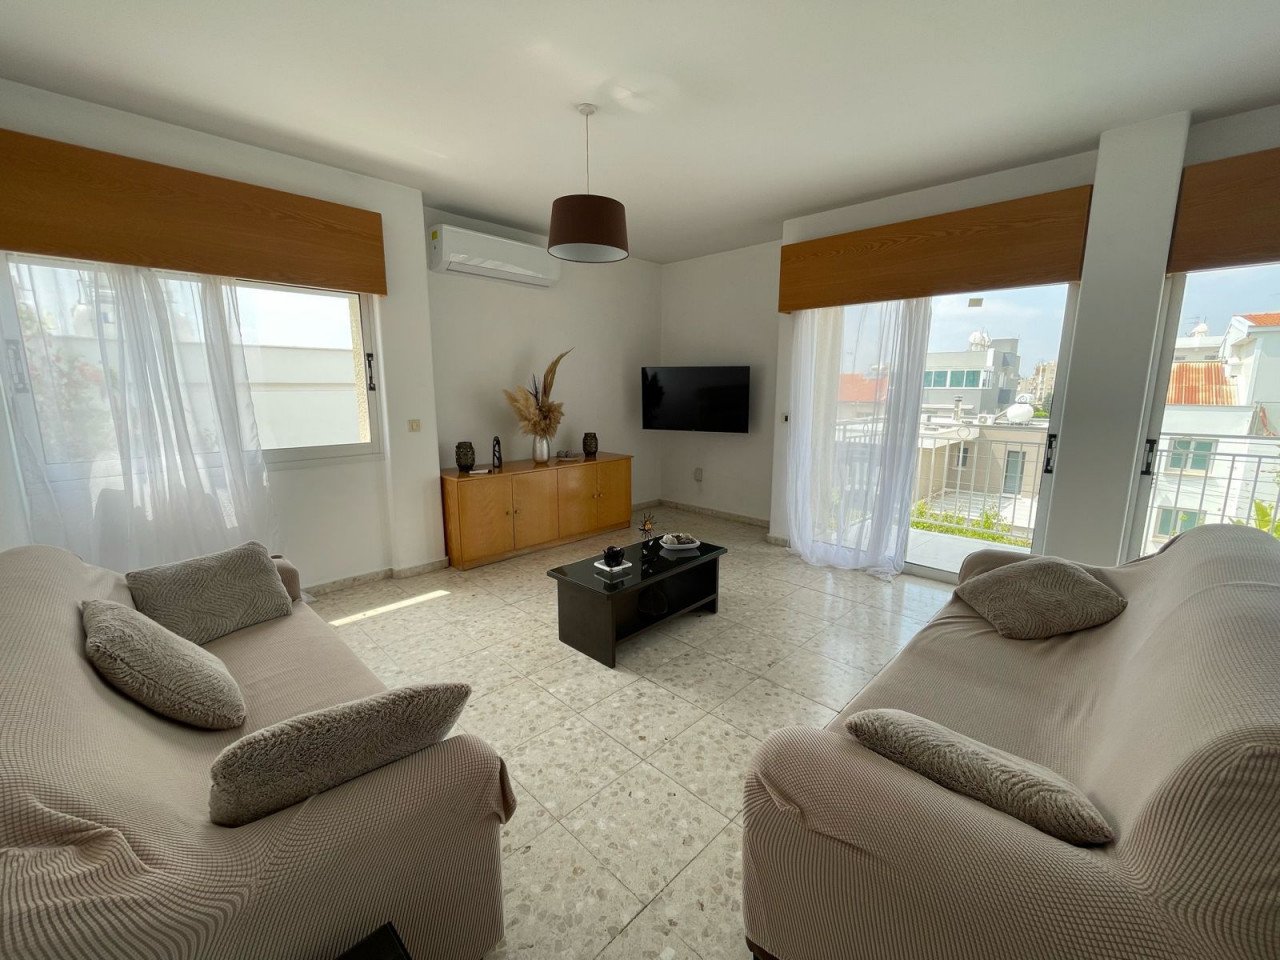 Property for Rent: Apartment (Flat) in Naafi, Limassol for Rent | Key Realtor Cyprus